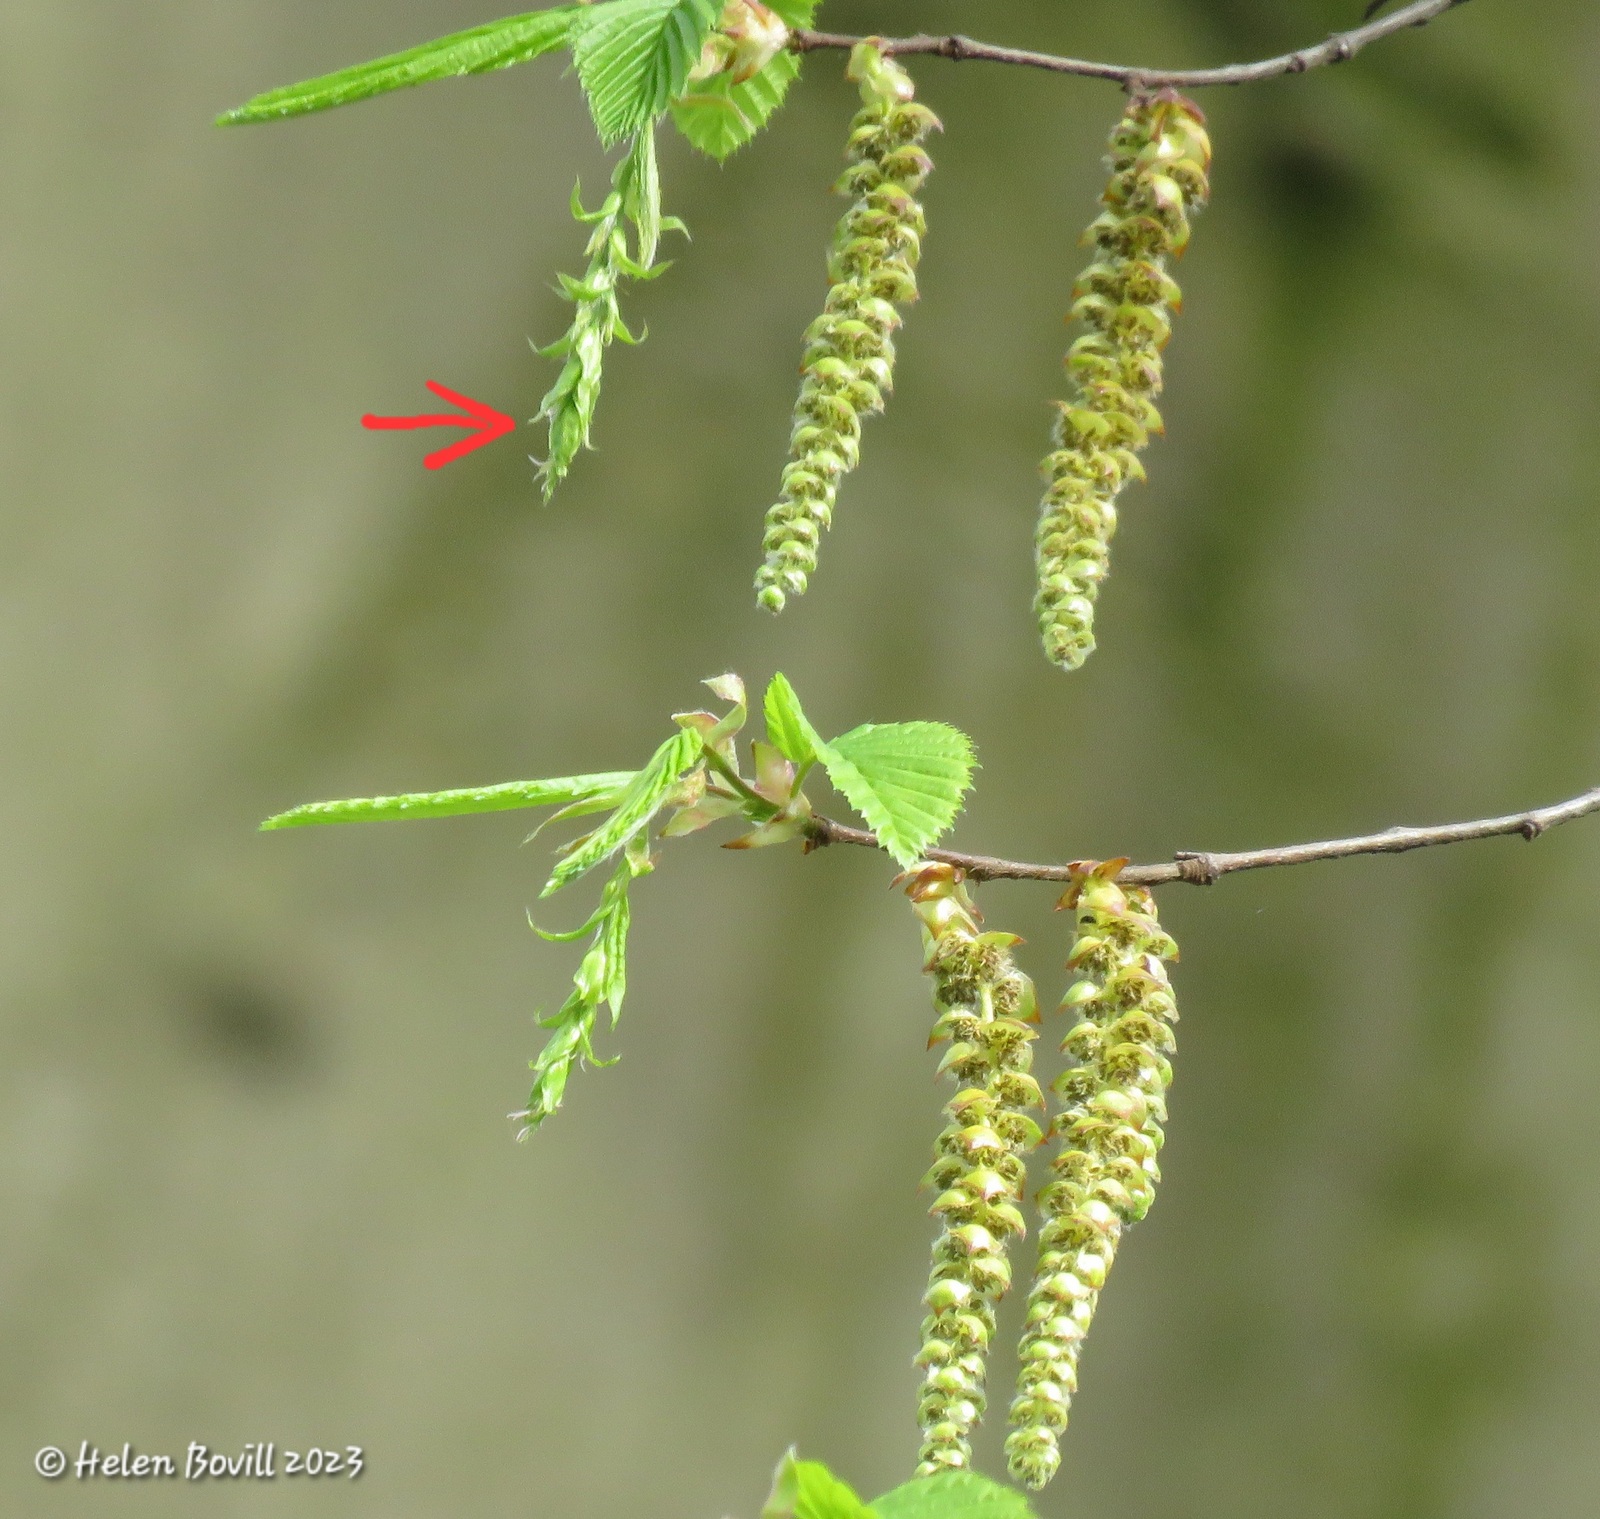 The male and female catkins of the Hornbeam tree